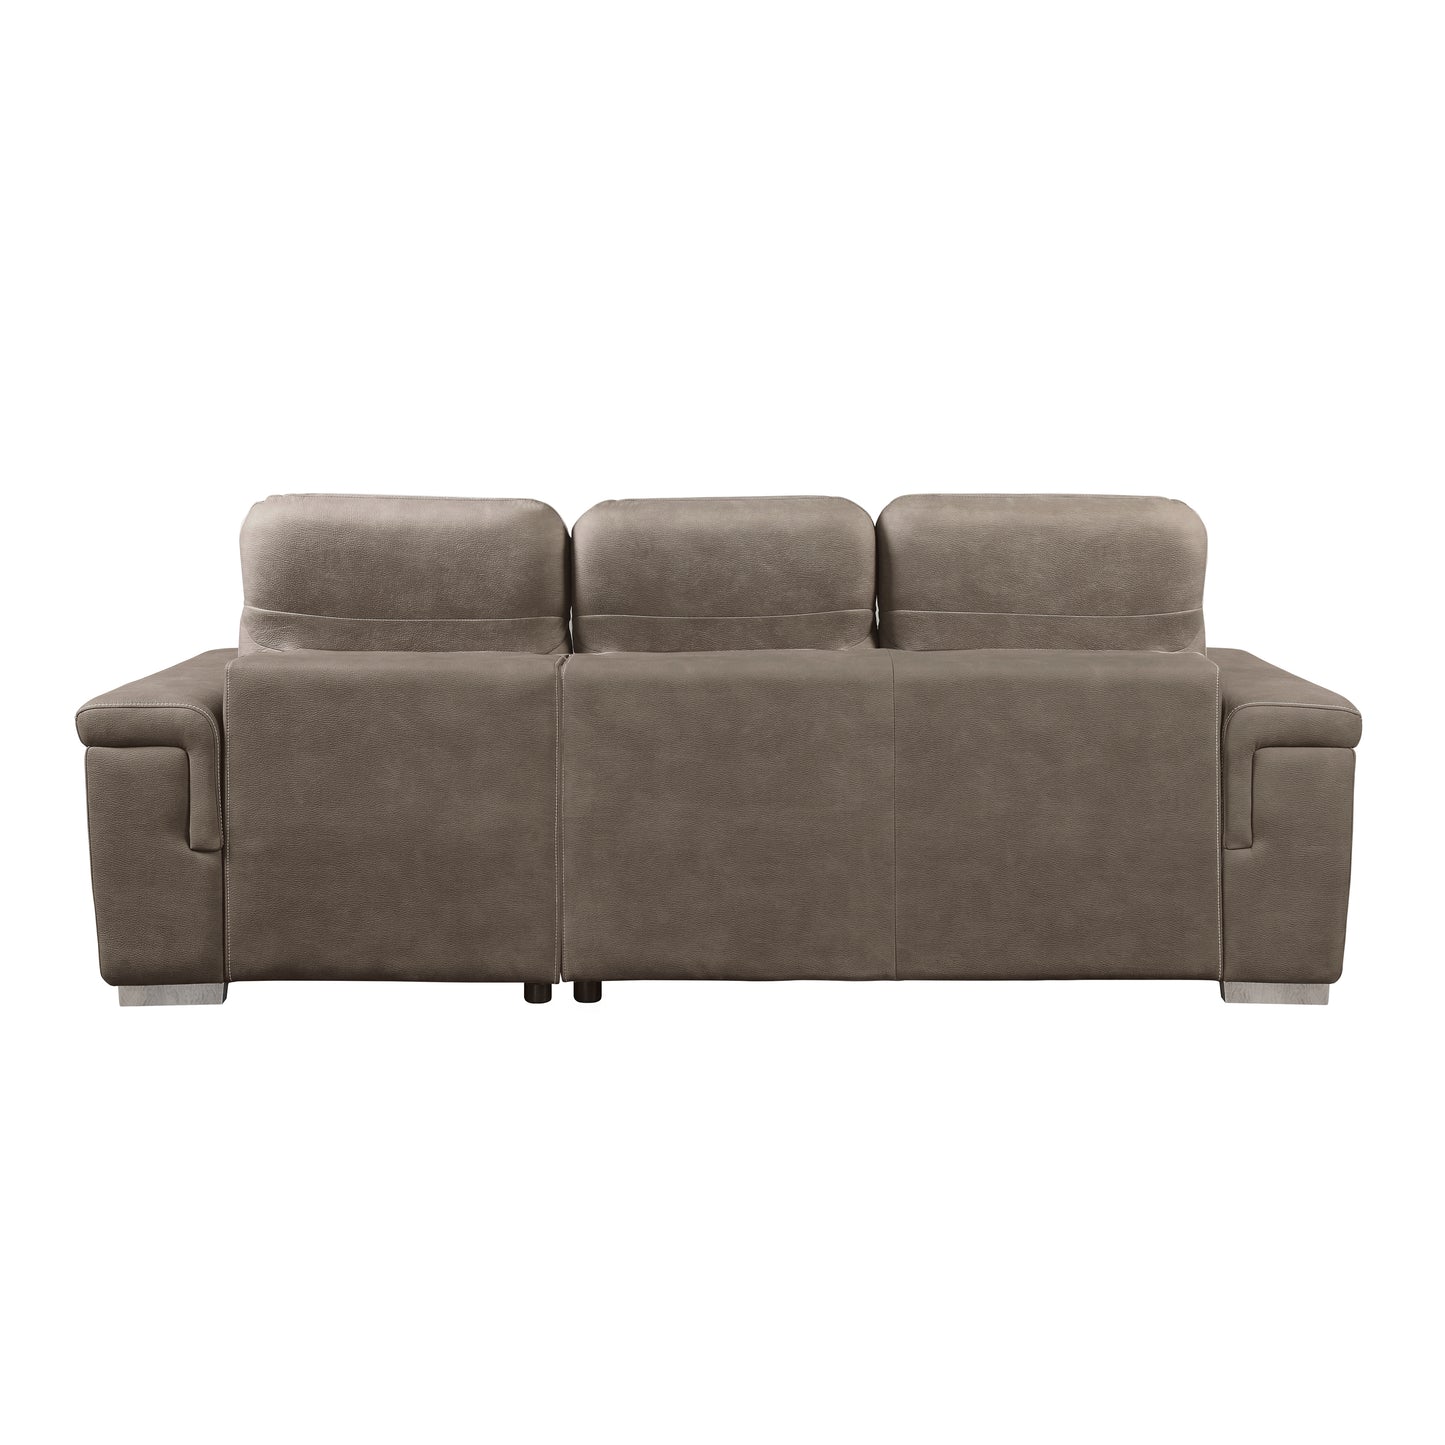 Alfio 2-Pcs Sectional w/ Adj. Headrests, Pull-out Bed & Right Chaise w/ Hidden Storage TAUPE